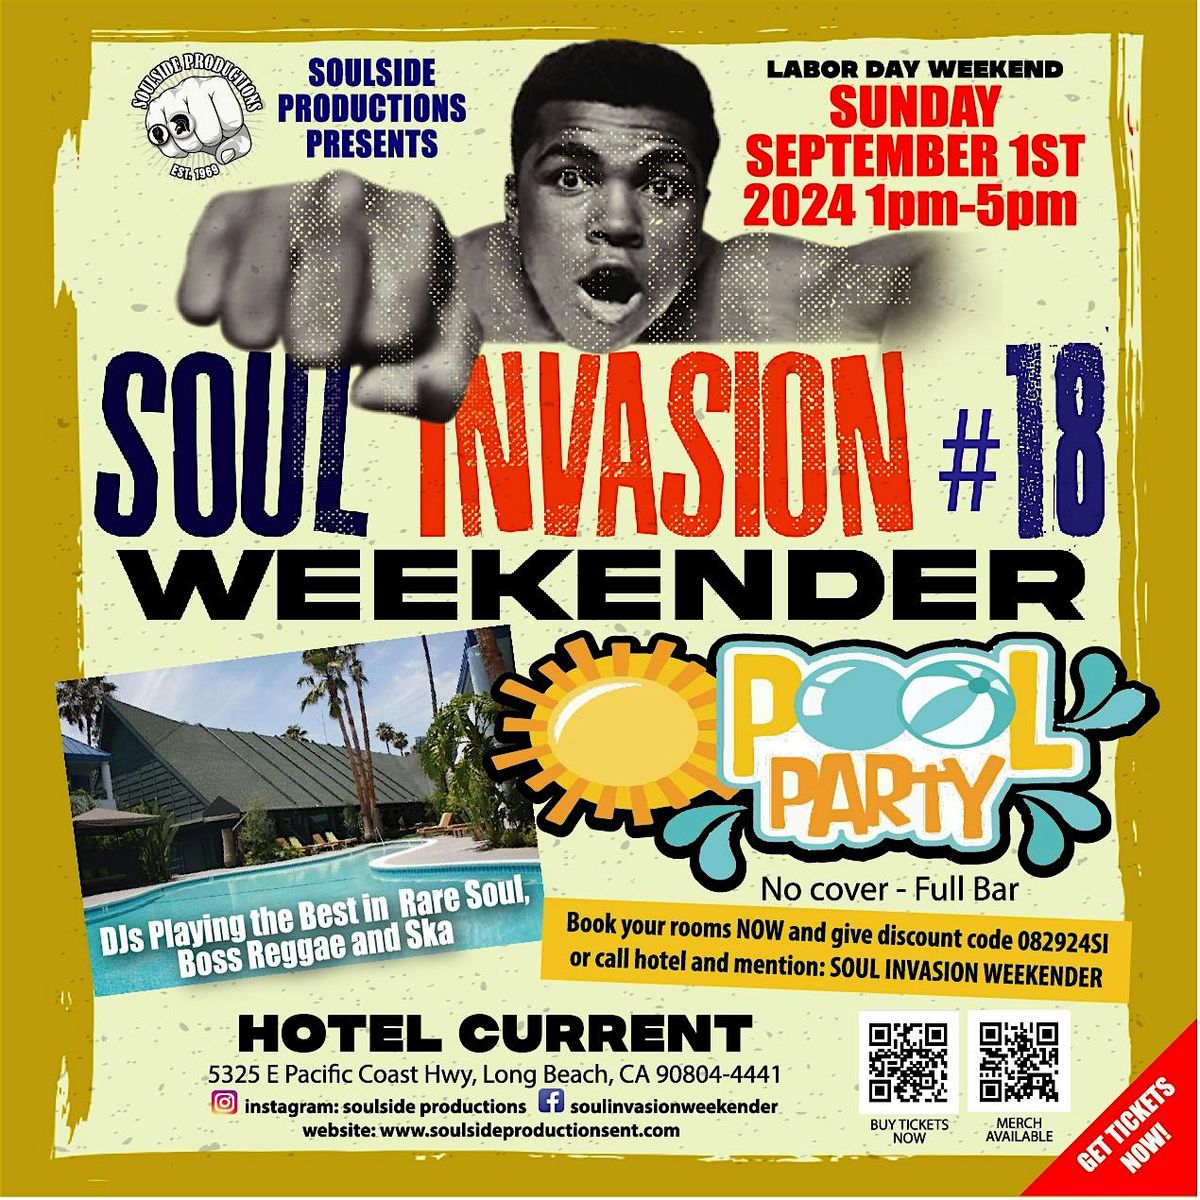 SOUL INVASION WEEKENDER POOL PARTY ( NO COVER )